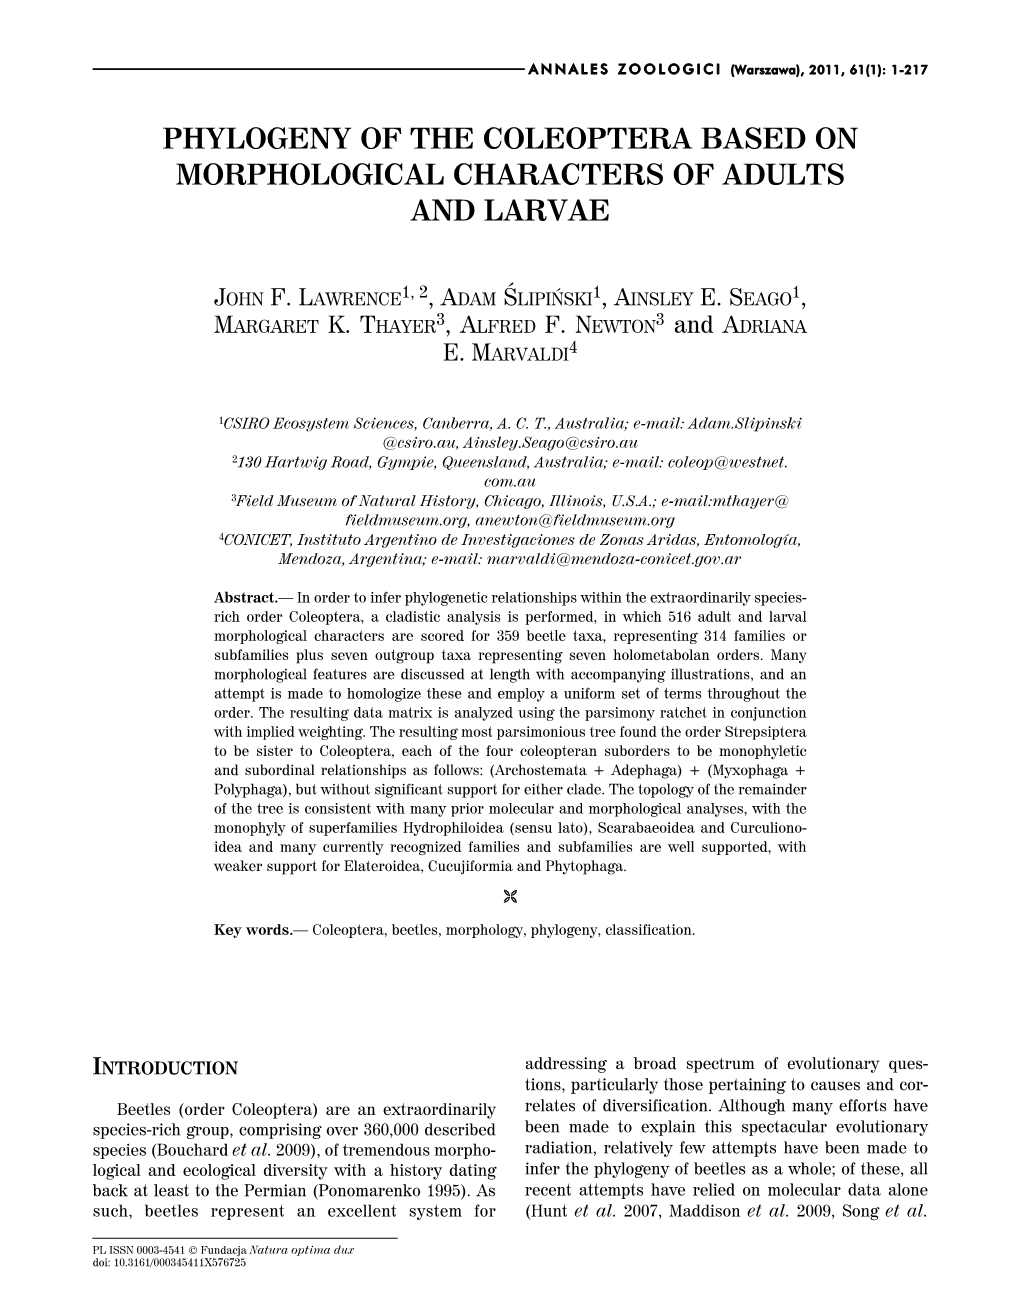 Phylogeny of the Coleoptera Based on Morphological Characters of Adults and Larvae